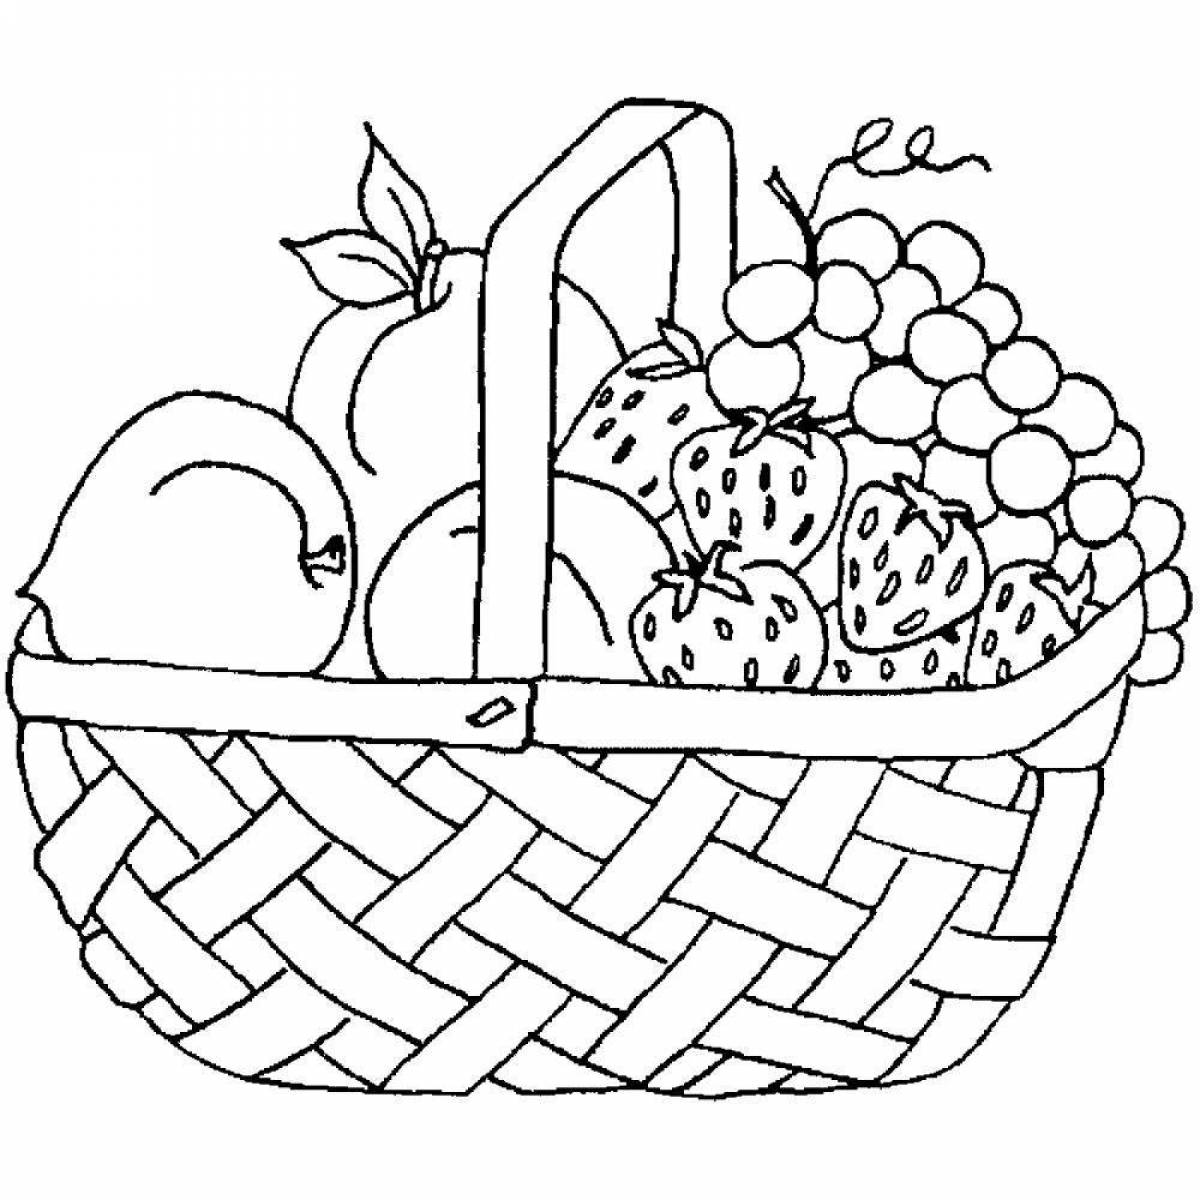 Coloring live basket with mushrooms